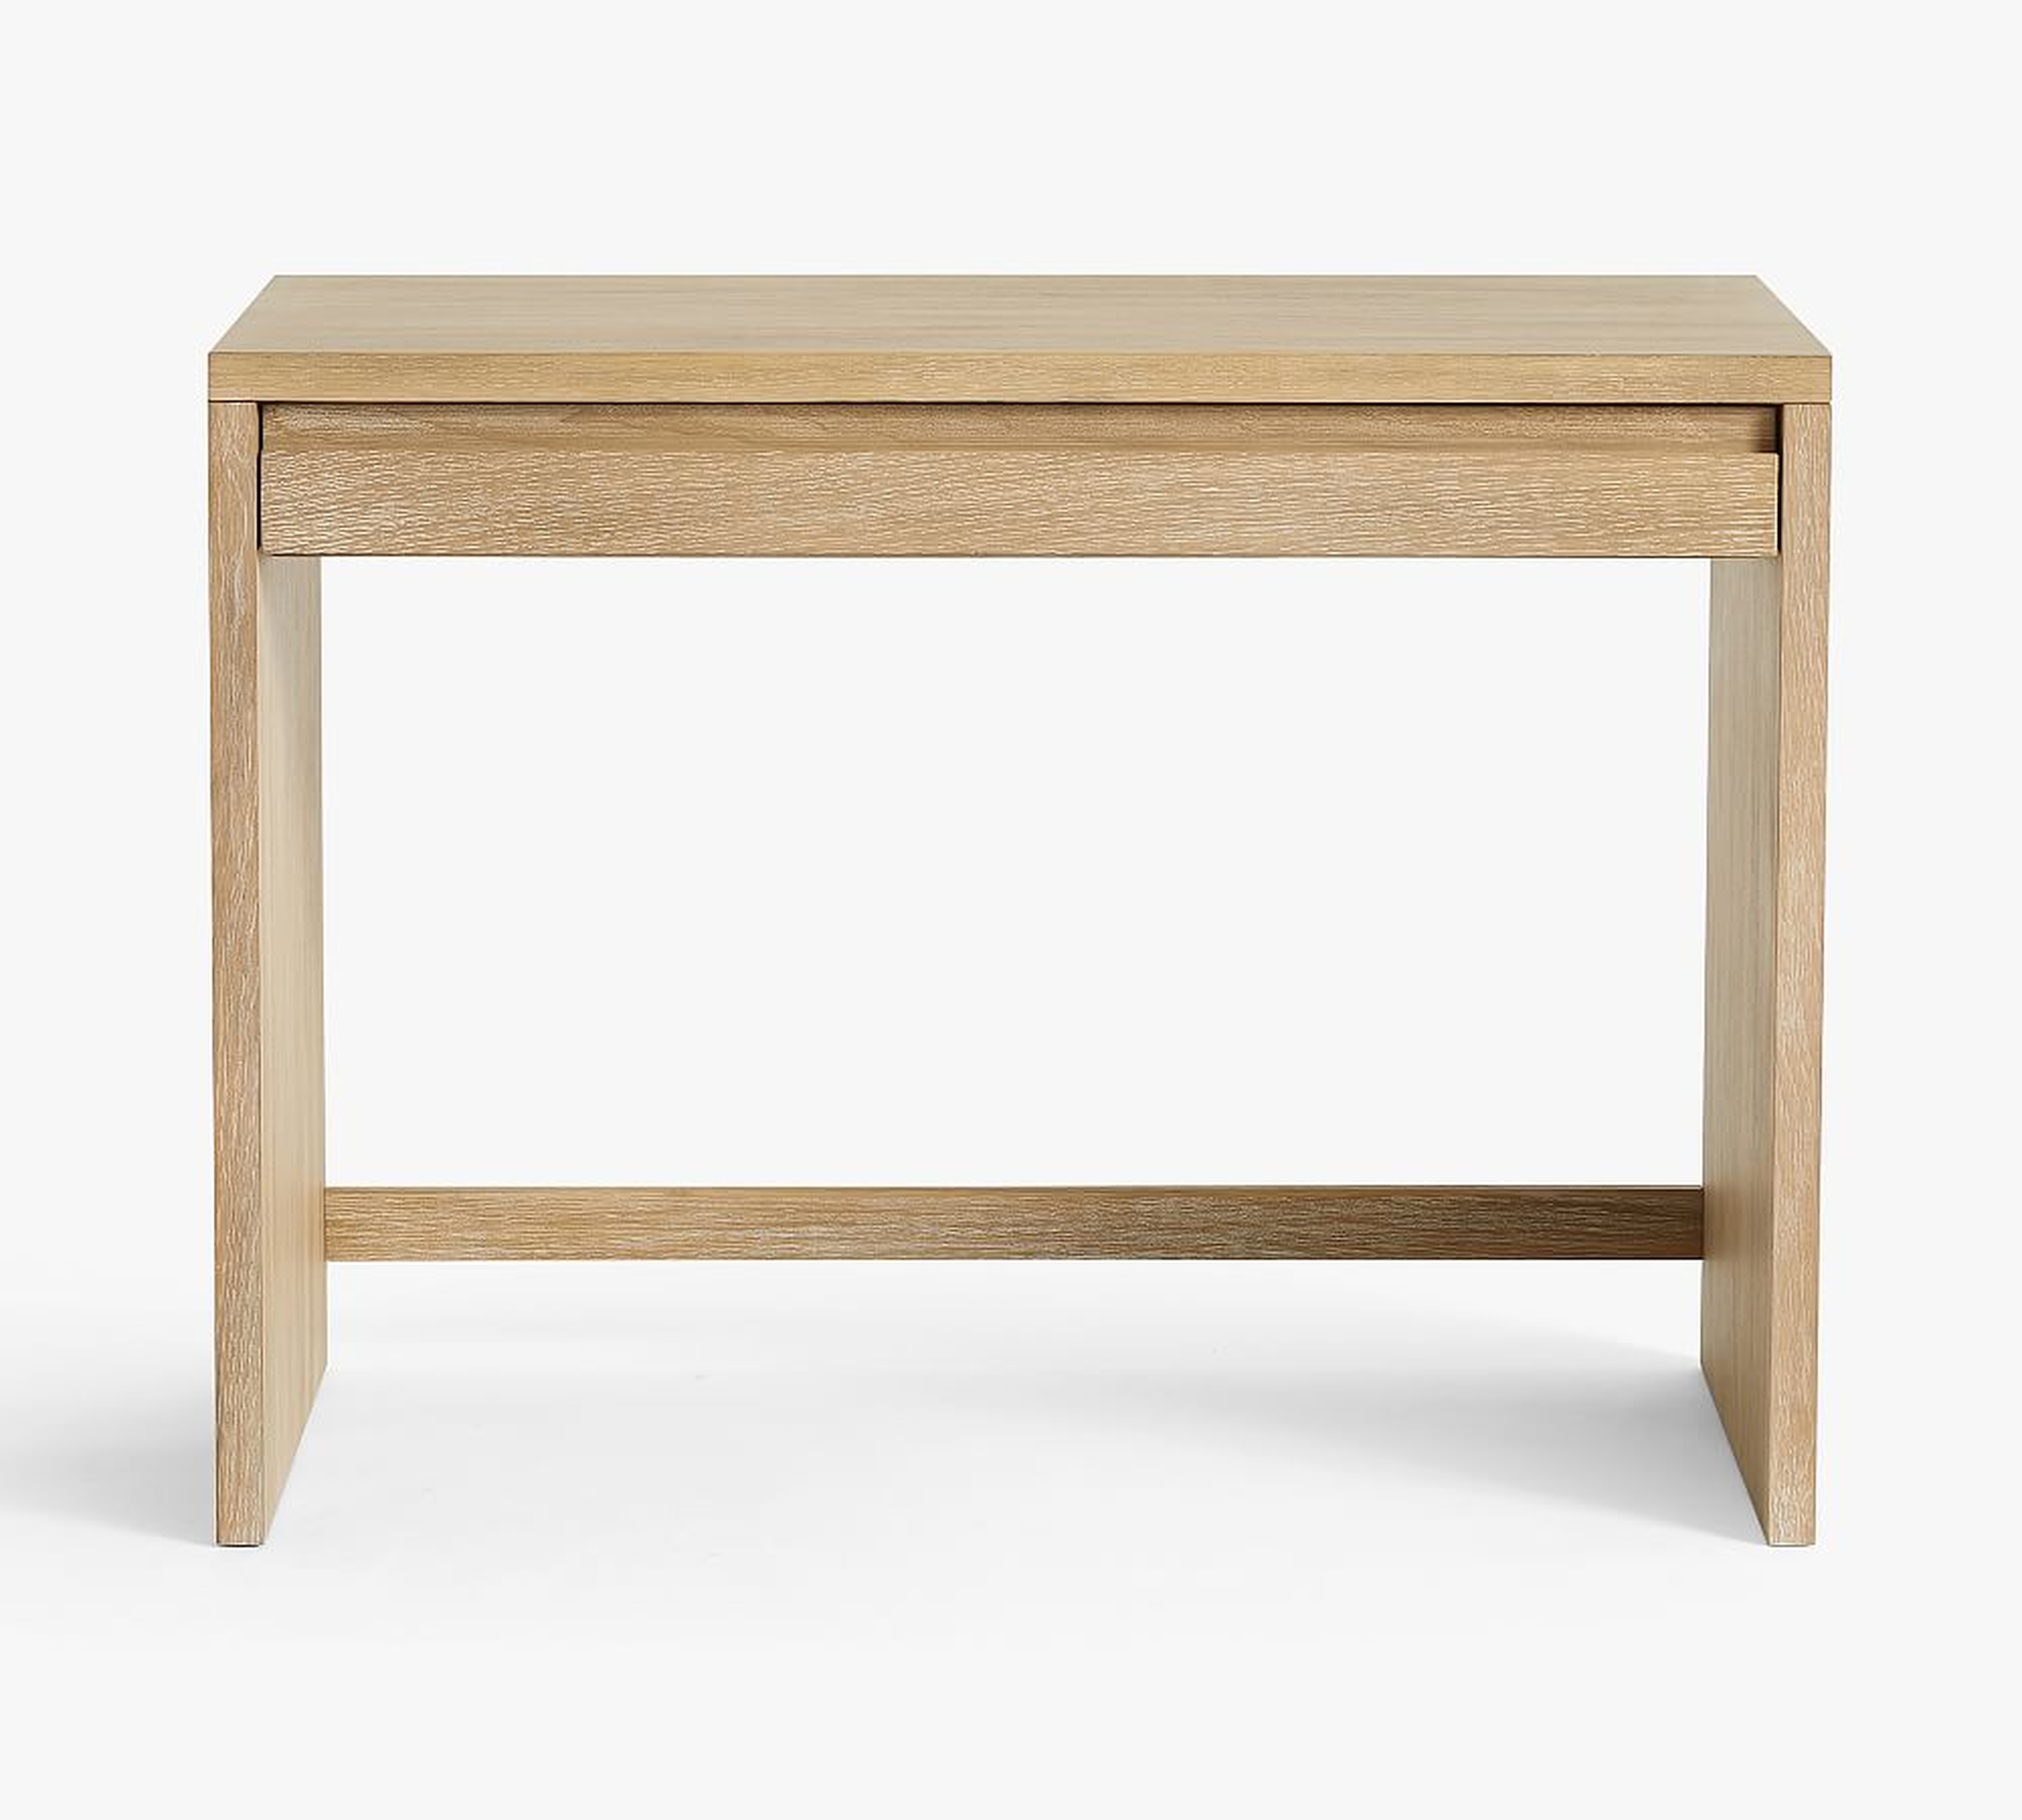 Pacific 40" Desk with Drawer, Fog - Pottery Barn